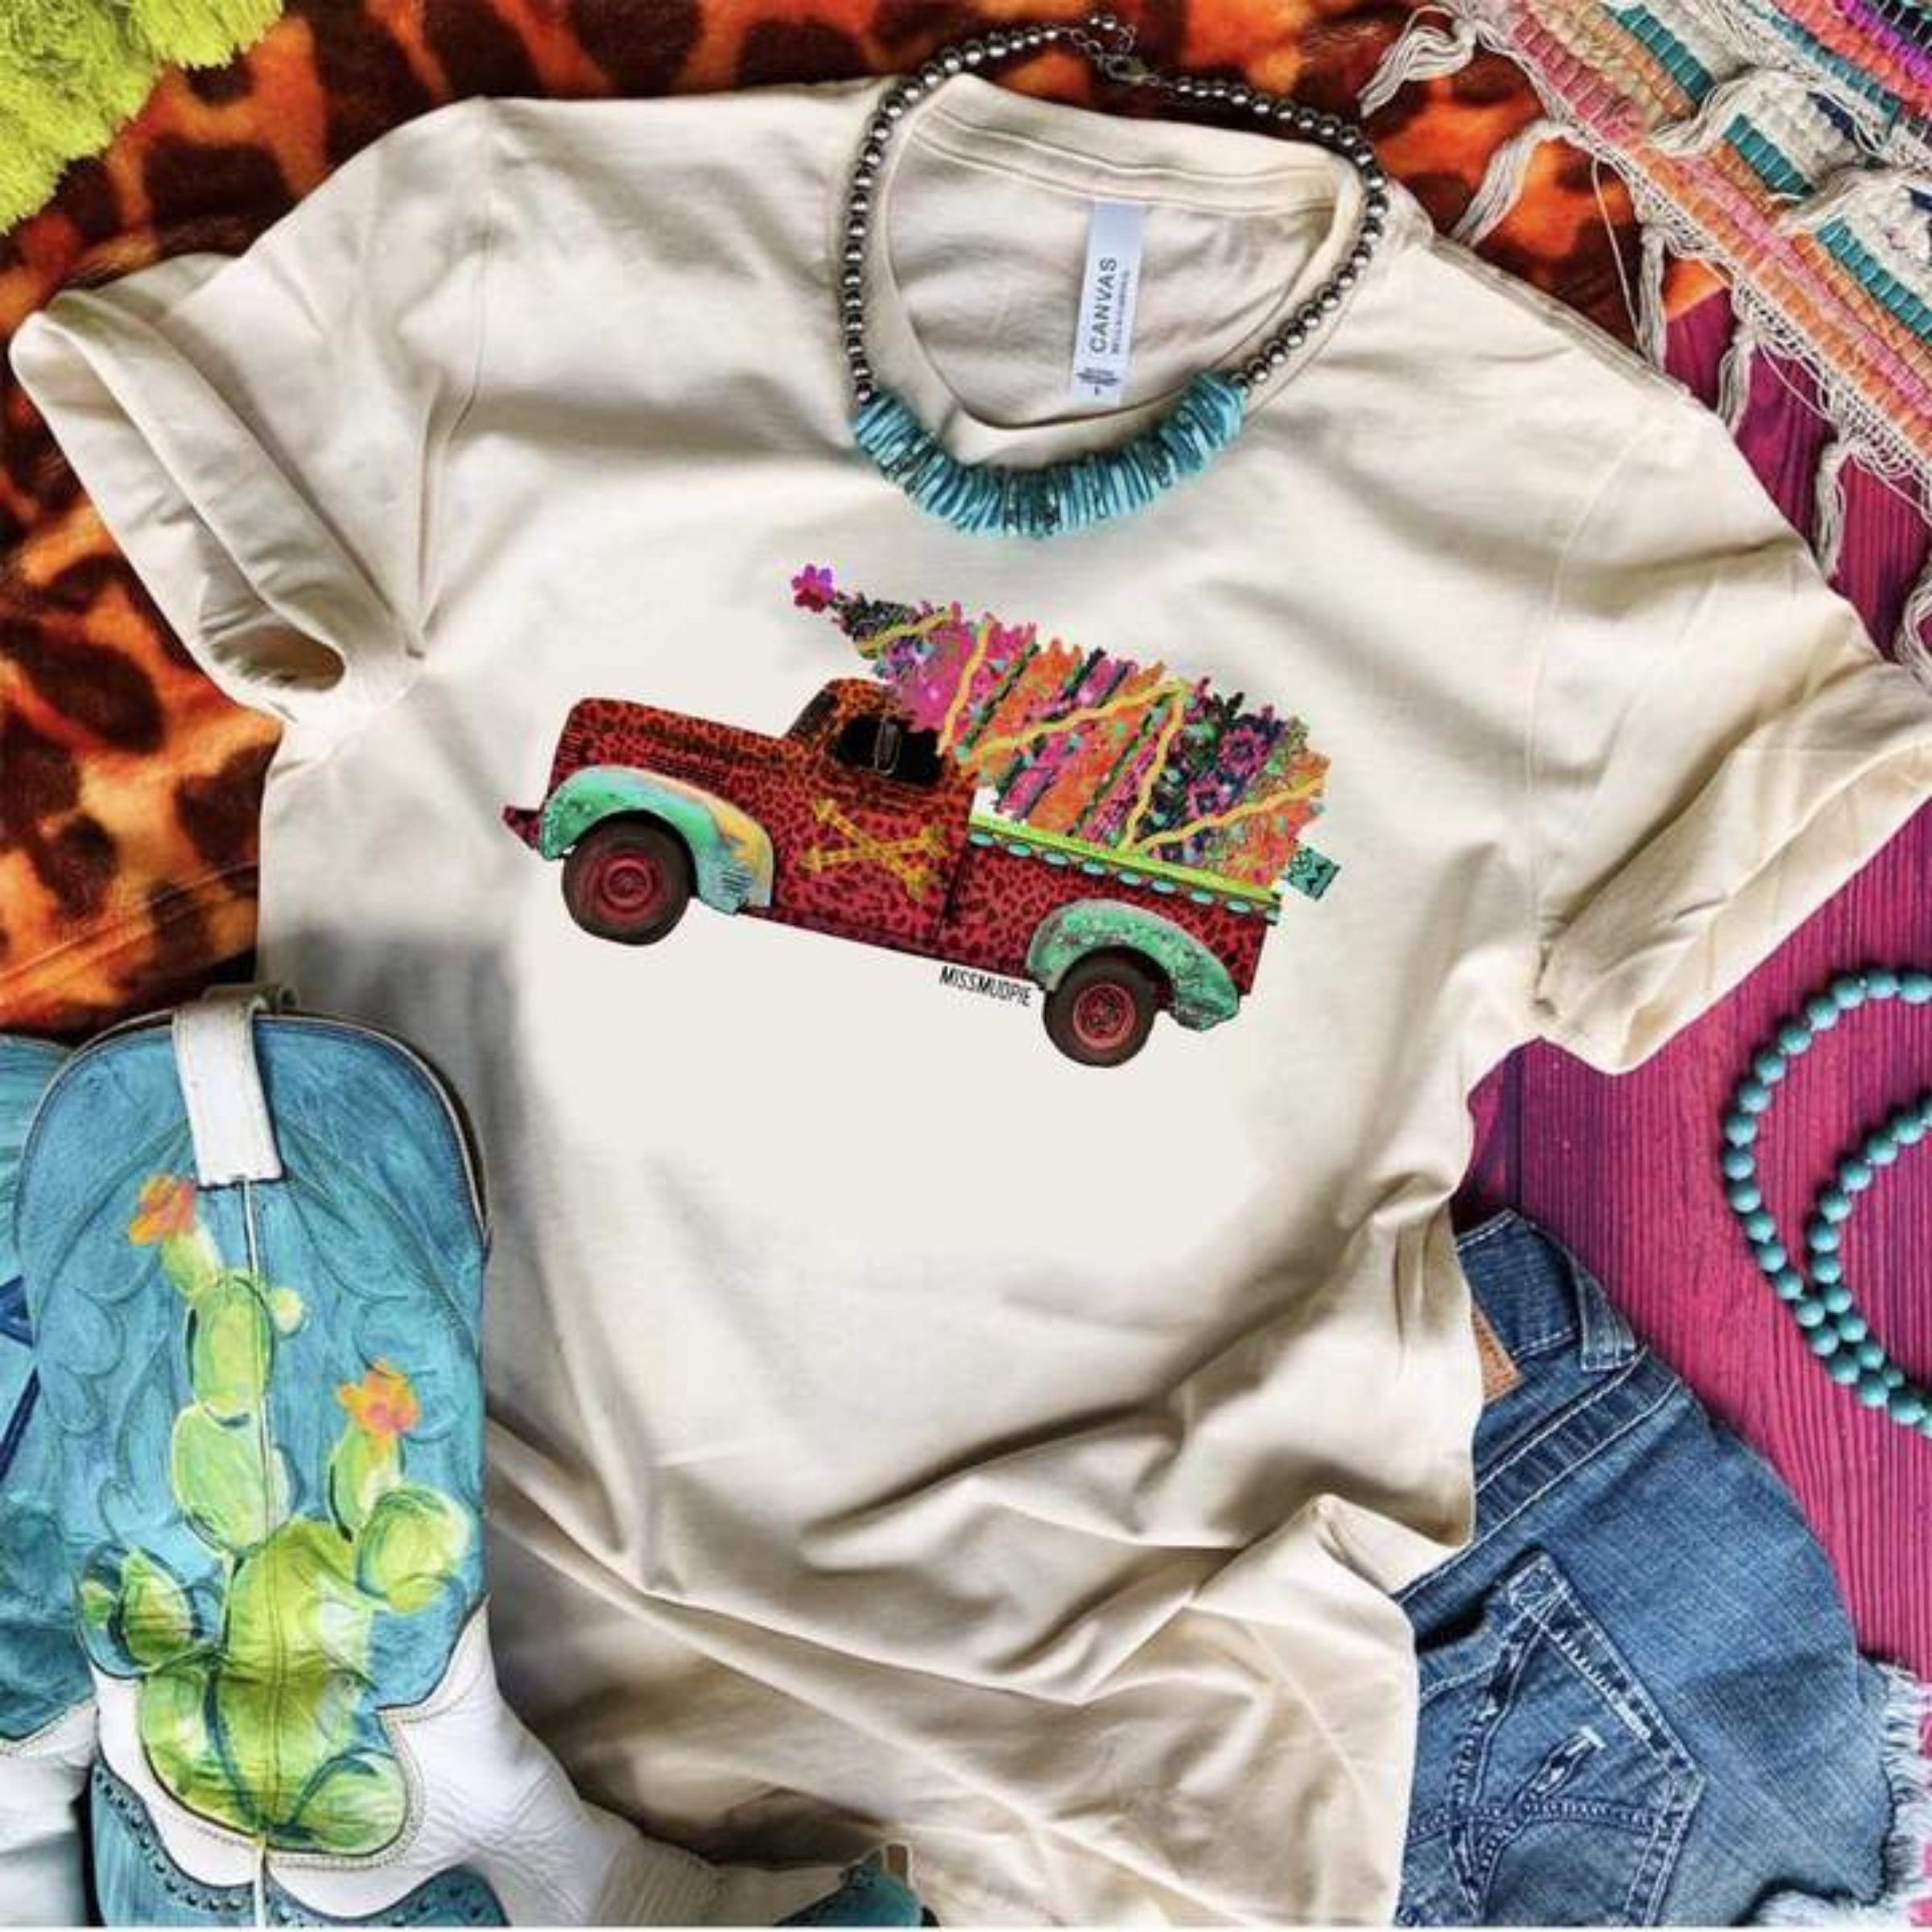 This Bella + Canvas cream tee includes a crew neckline, short sleeves, and a cute Christmas graphic of a red vintage truck and colorful Christmas tree in the back. This tee is shown as a flat lay with rolled sleeves, turquoise necklace, and turquoise cowboy boots. 